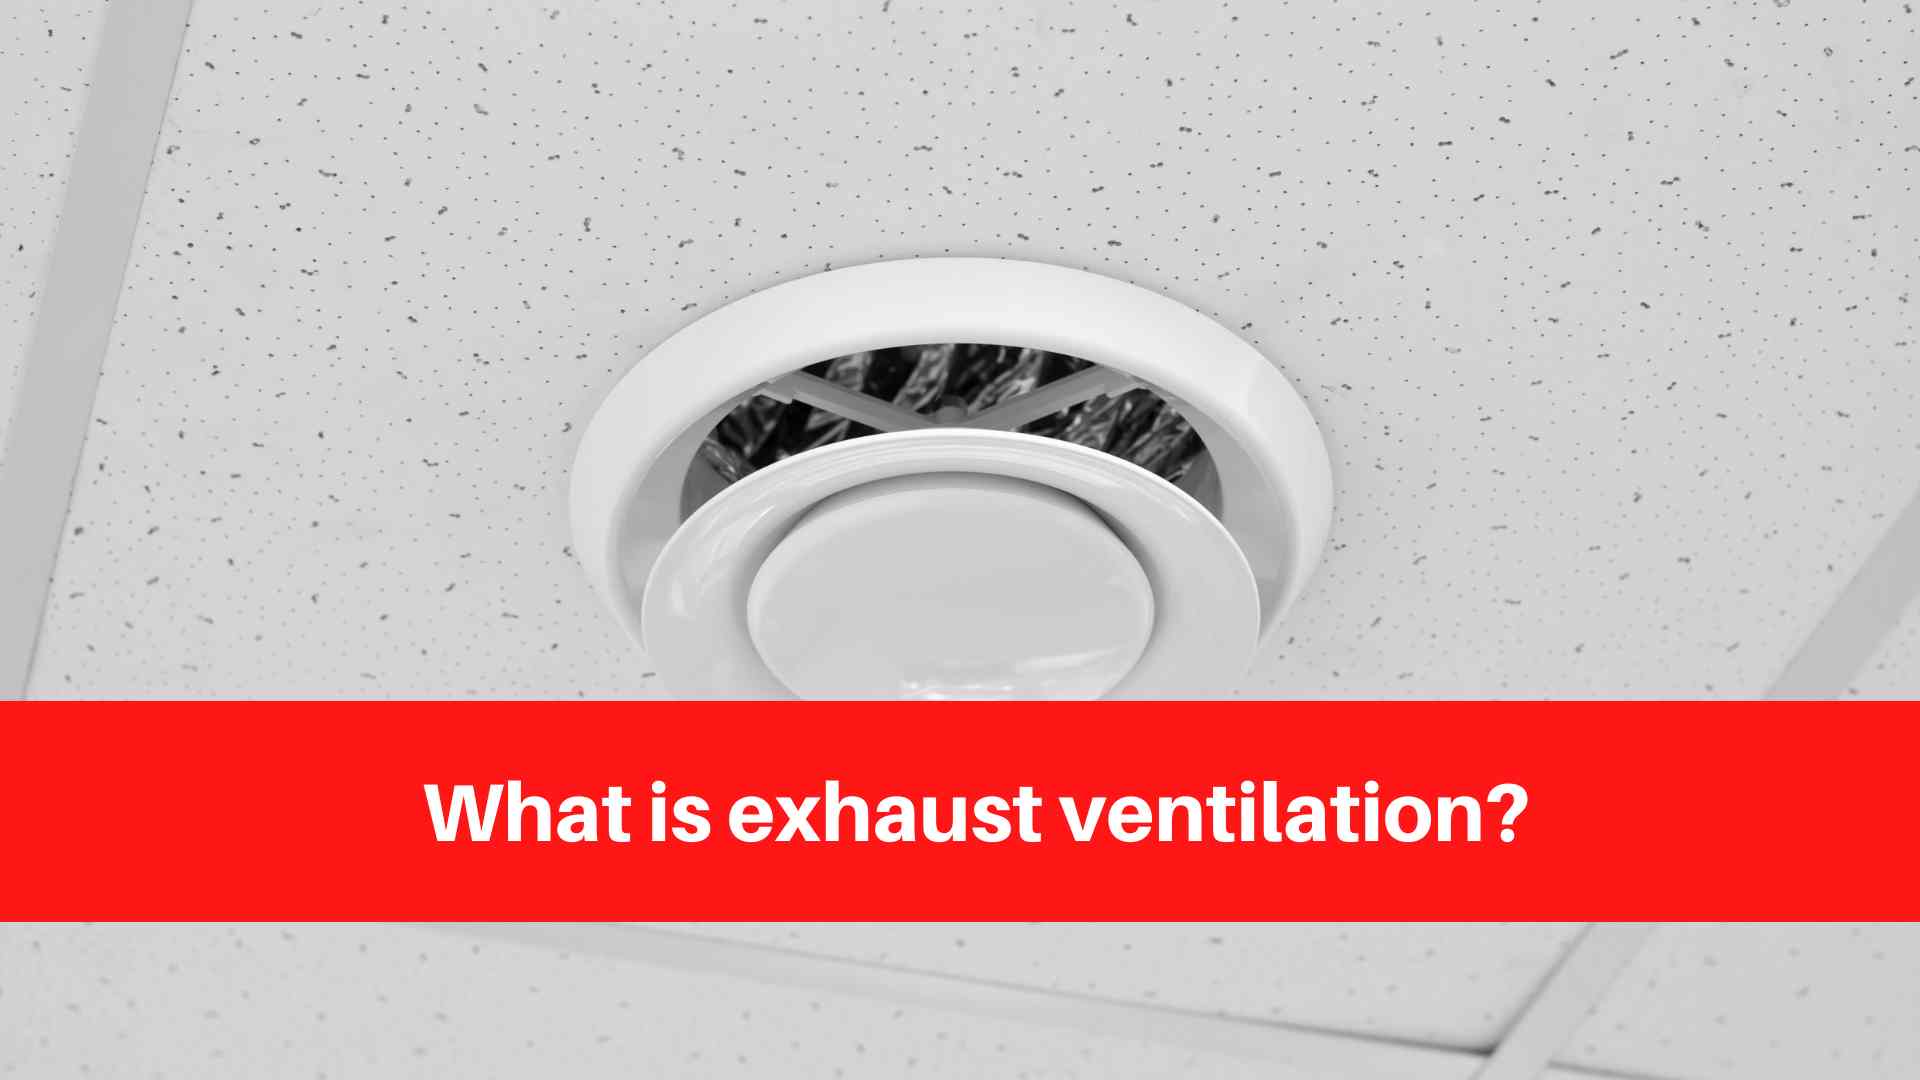 What is exhaust ventilation